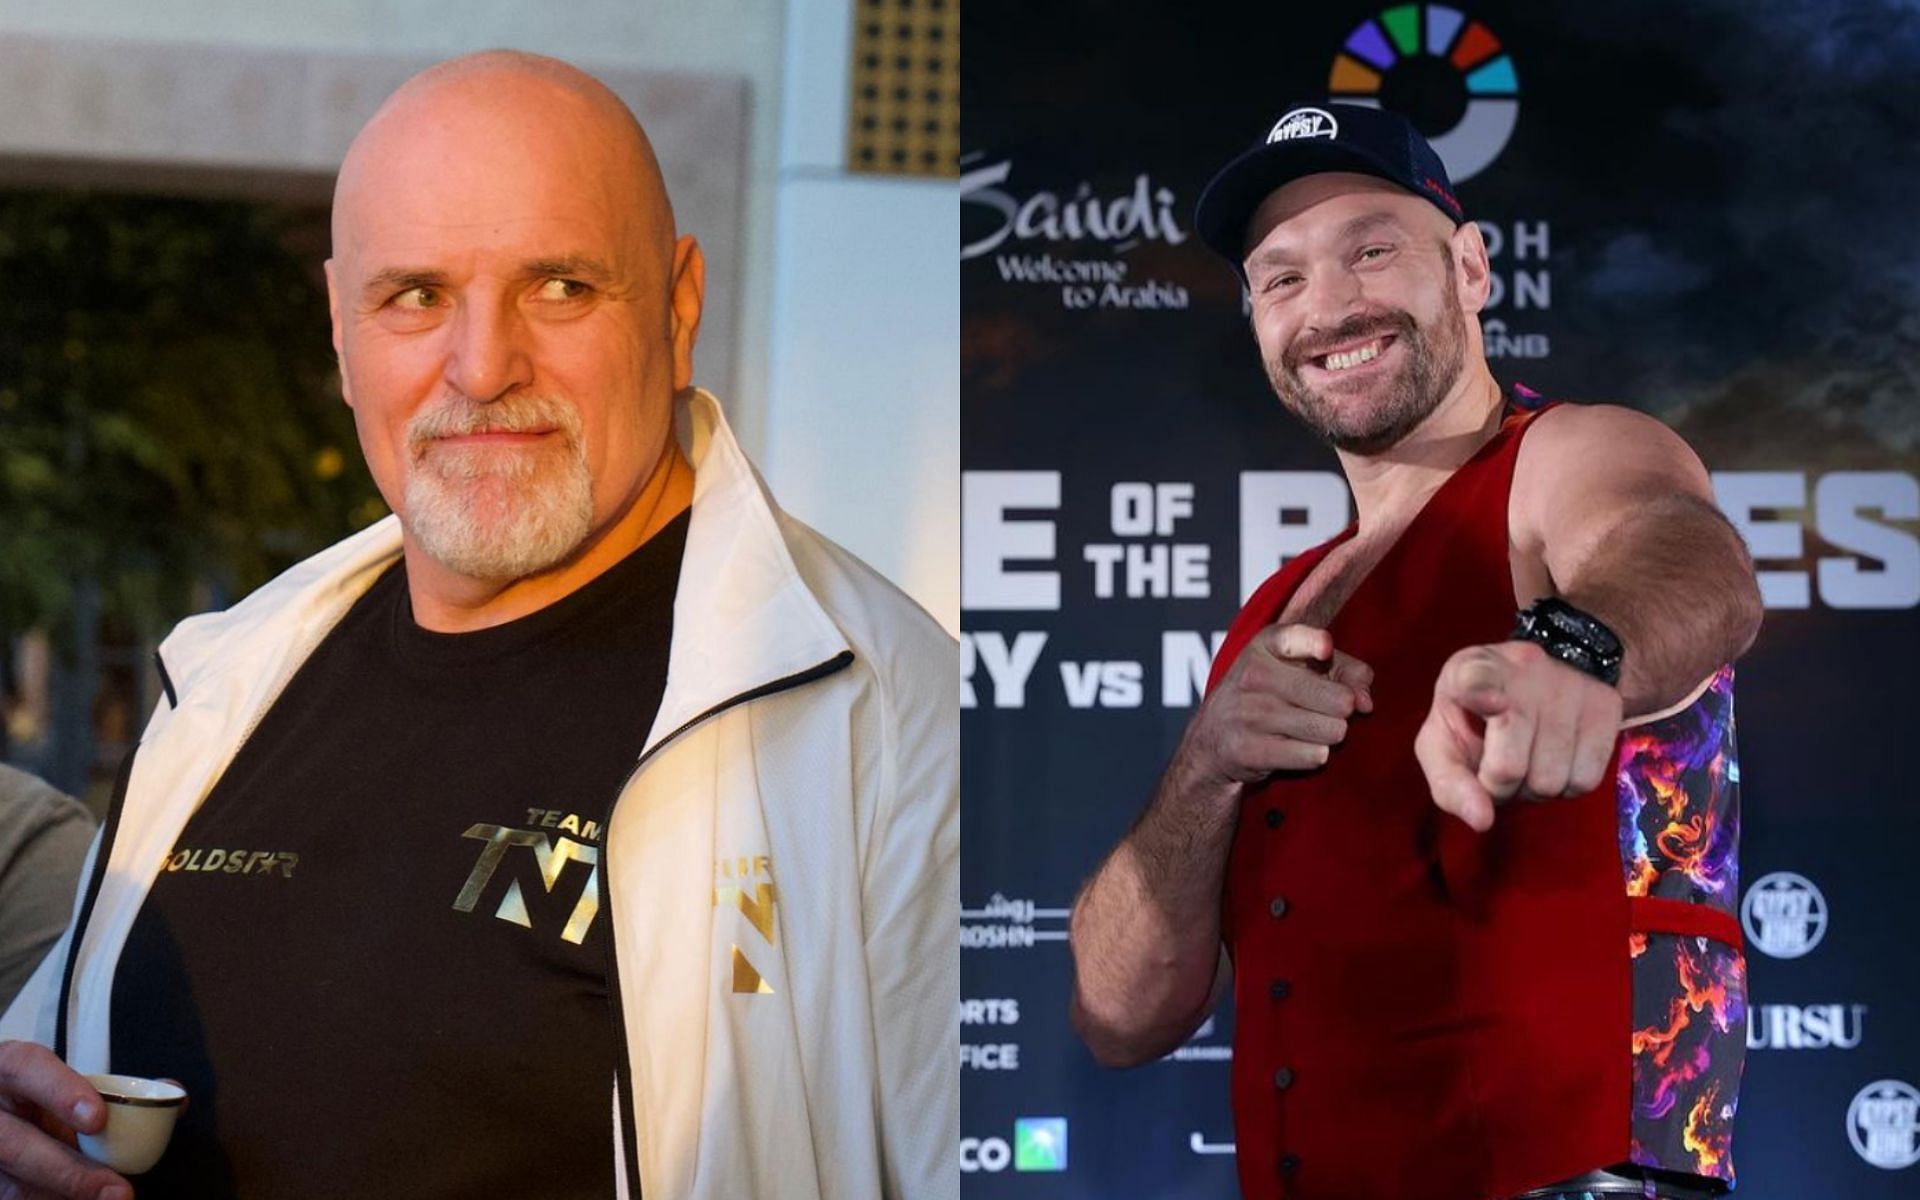 John Fury (left) spoke on his worries with Tyson Fury (right) ahead of his unification bout with Oleksandr Usyk [Photo Courtesy @gypsyjohnfury and @tysonfury on Instagram]